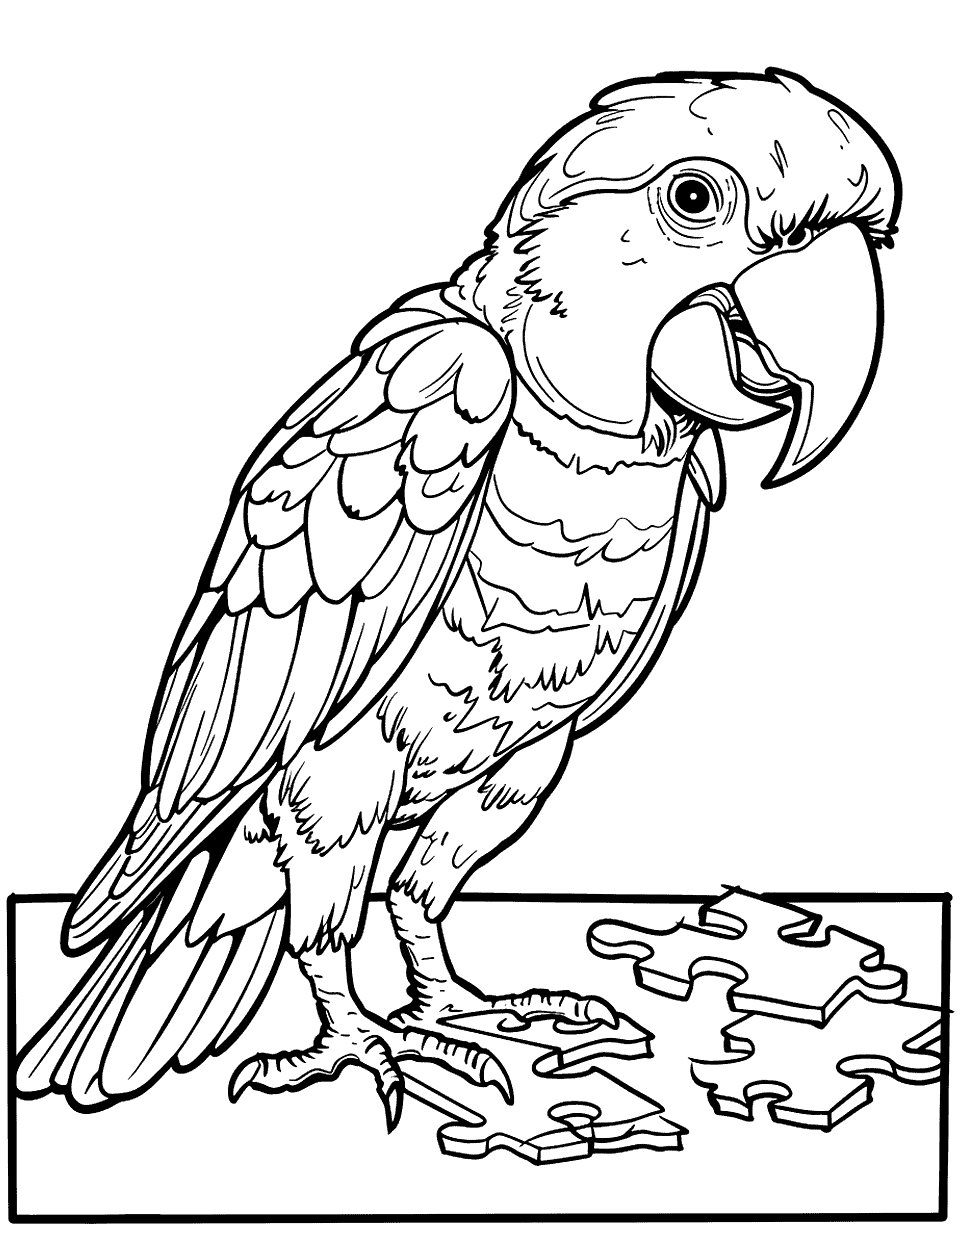 Parrot and a Simple Puzzle Coloring Page - A parrot interacting with pieces of a simple puzzle, showing curiosity.